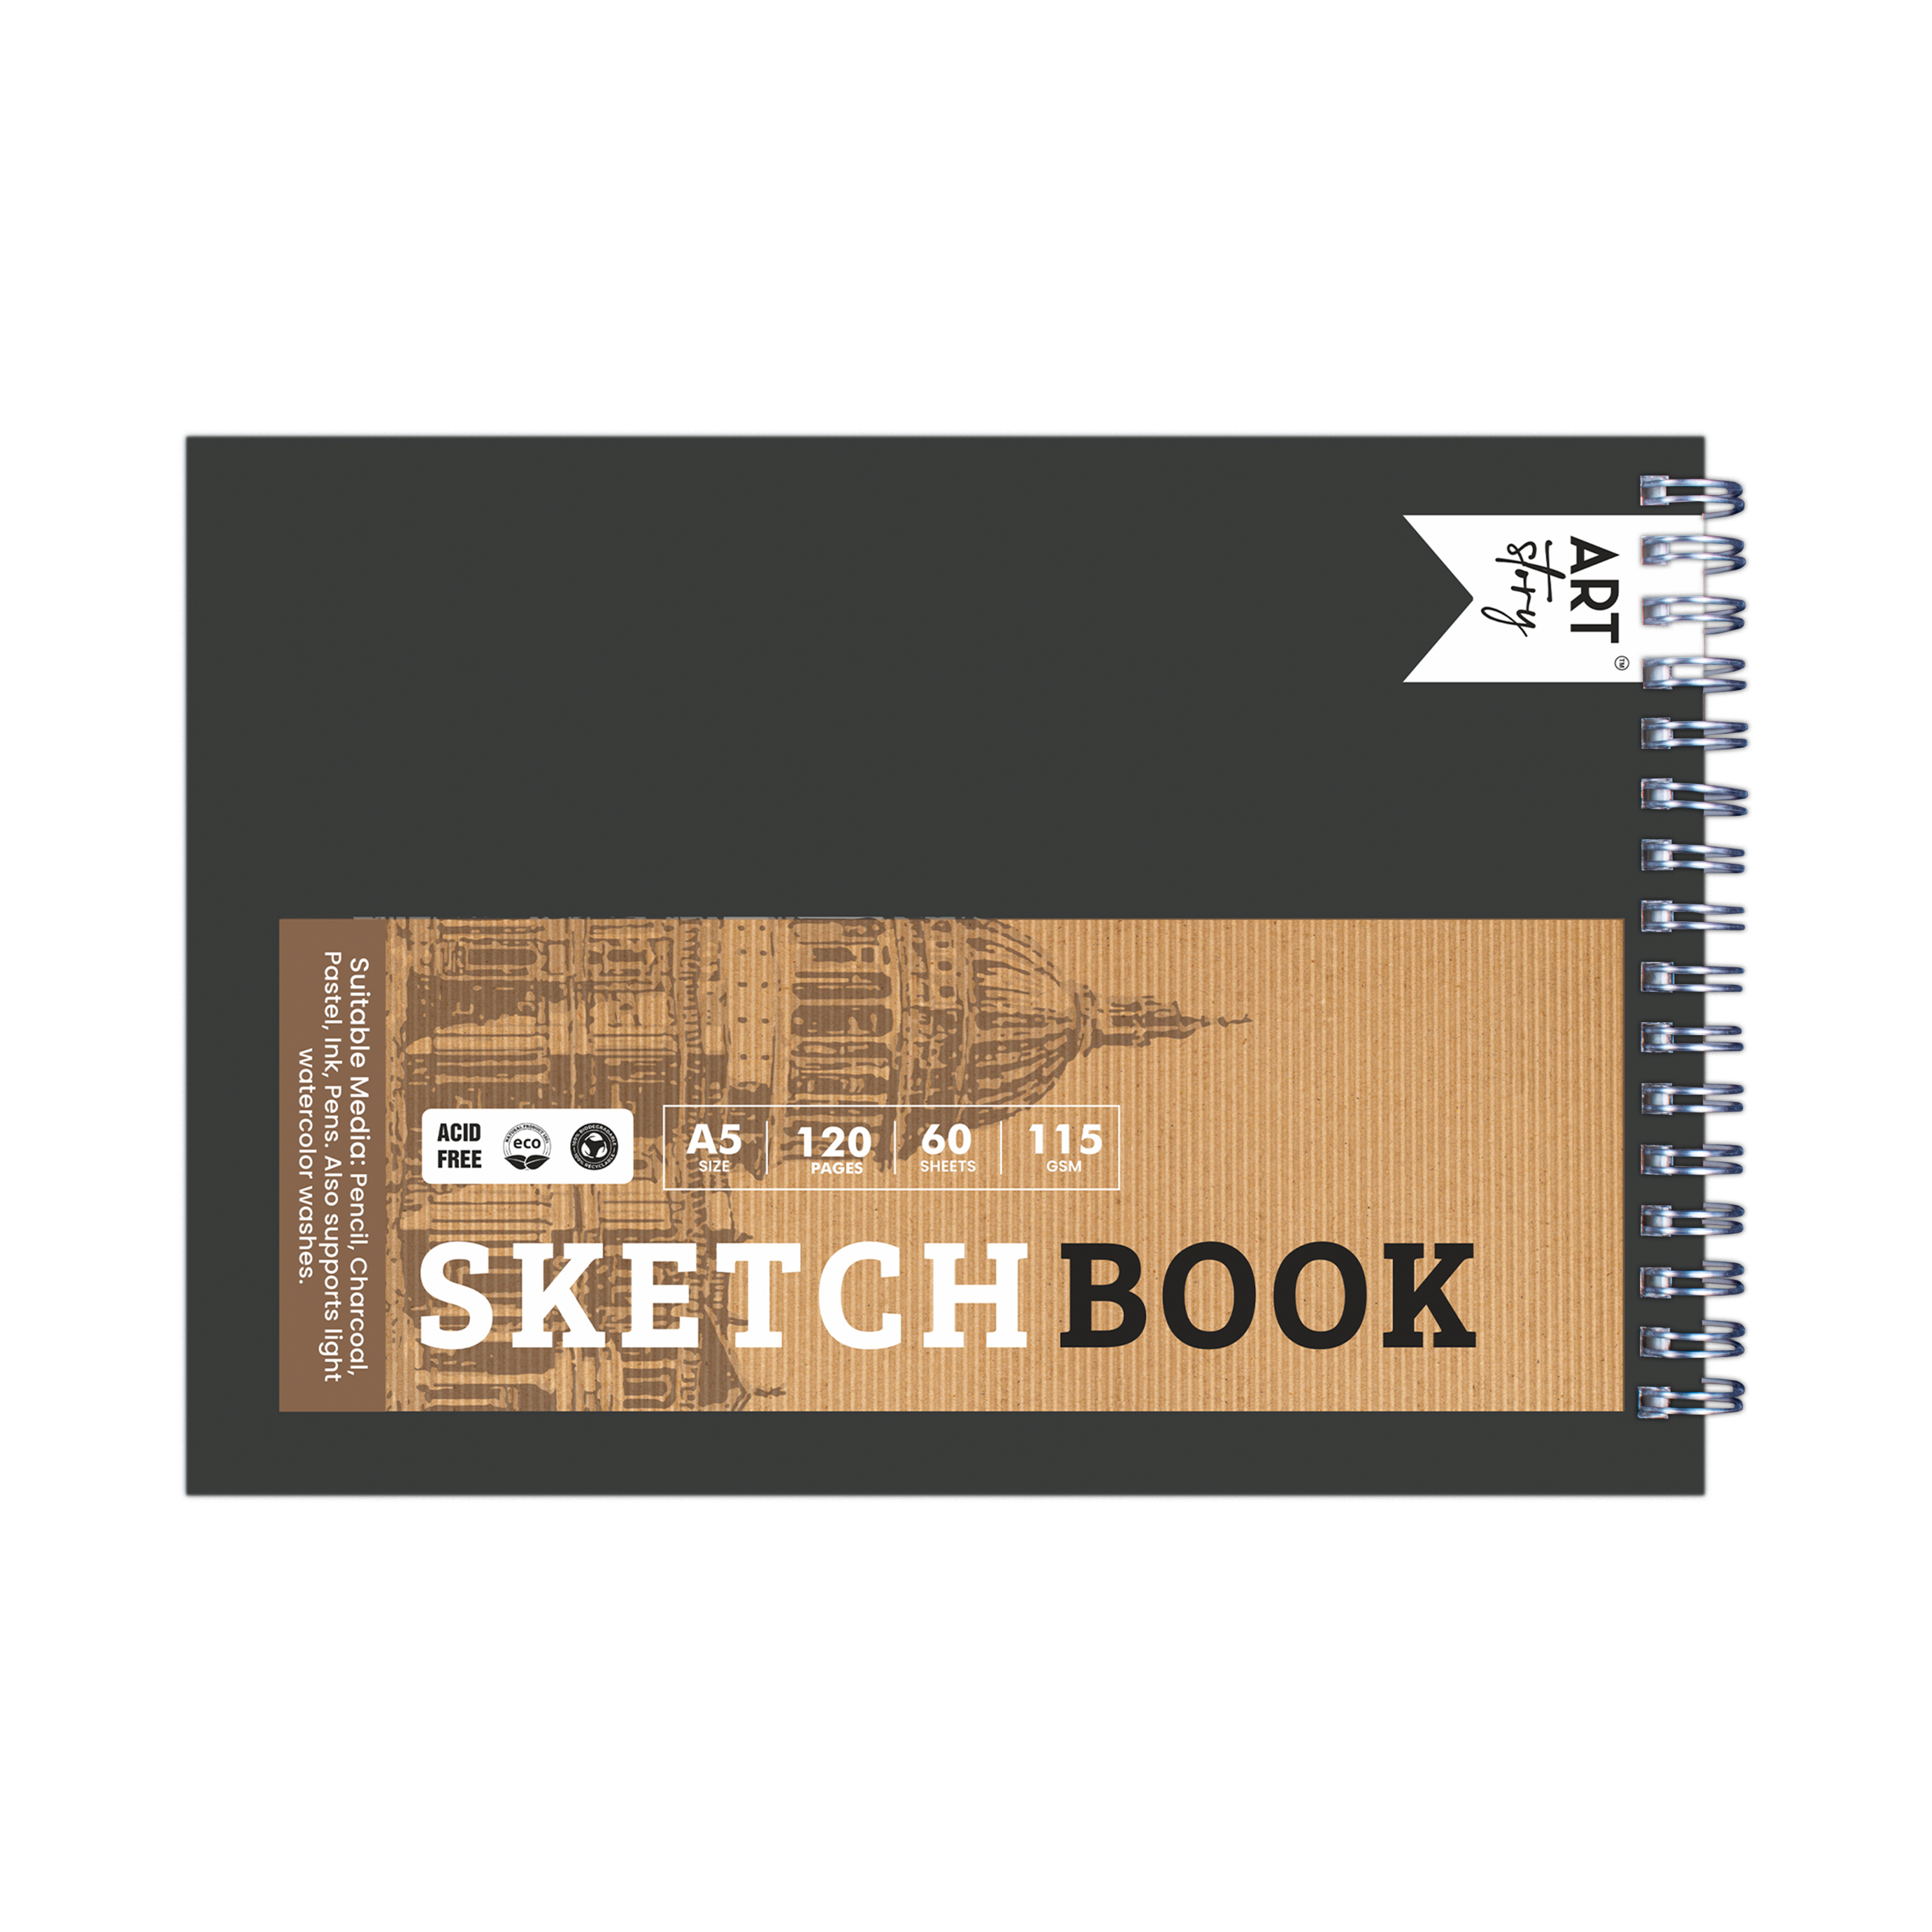 Sketchbook Artist Paper - A5 | Wire-O | 115gsm - 120Pages - 1 Book